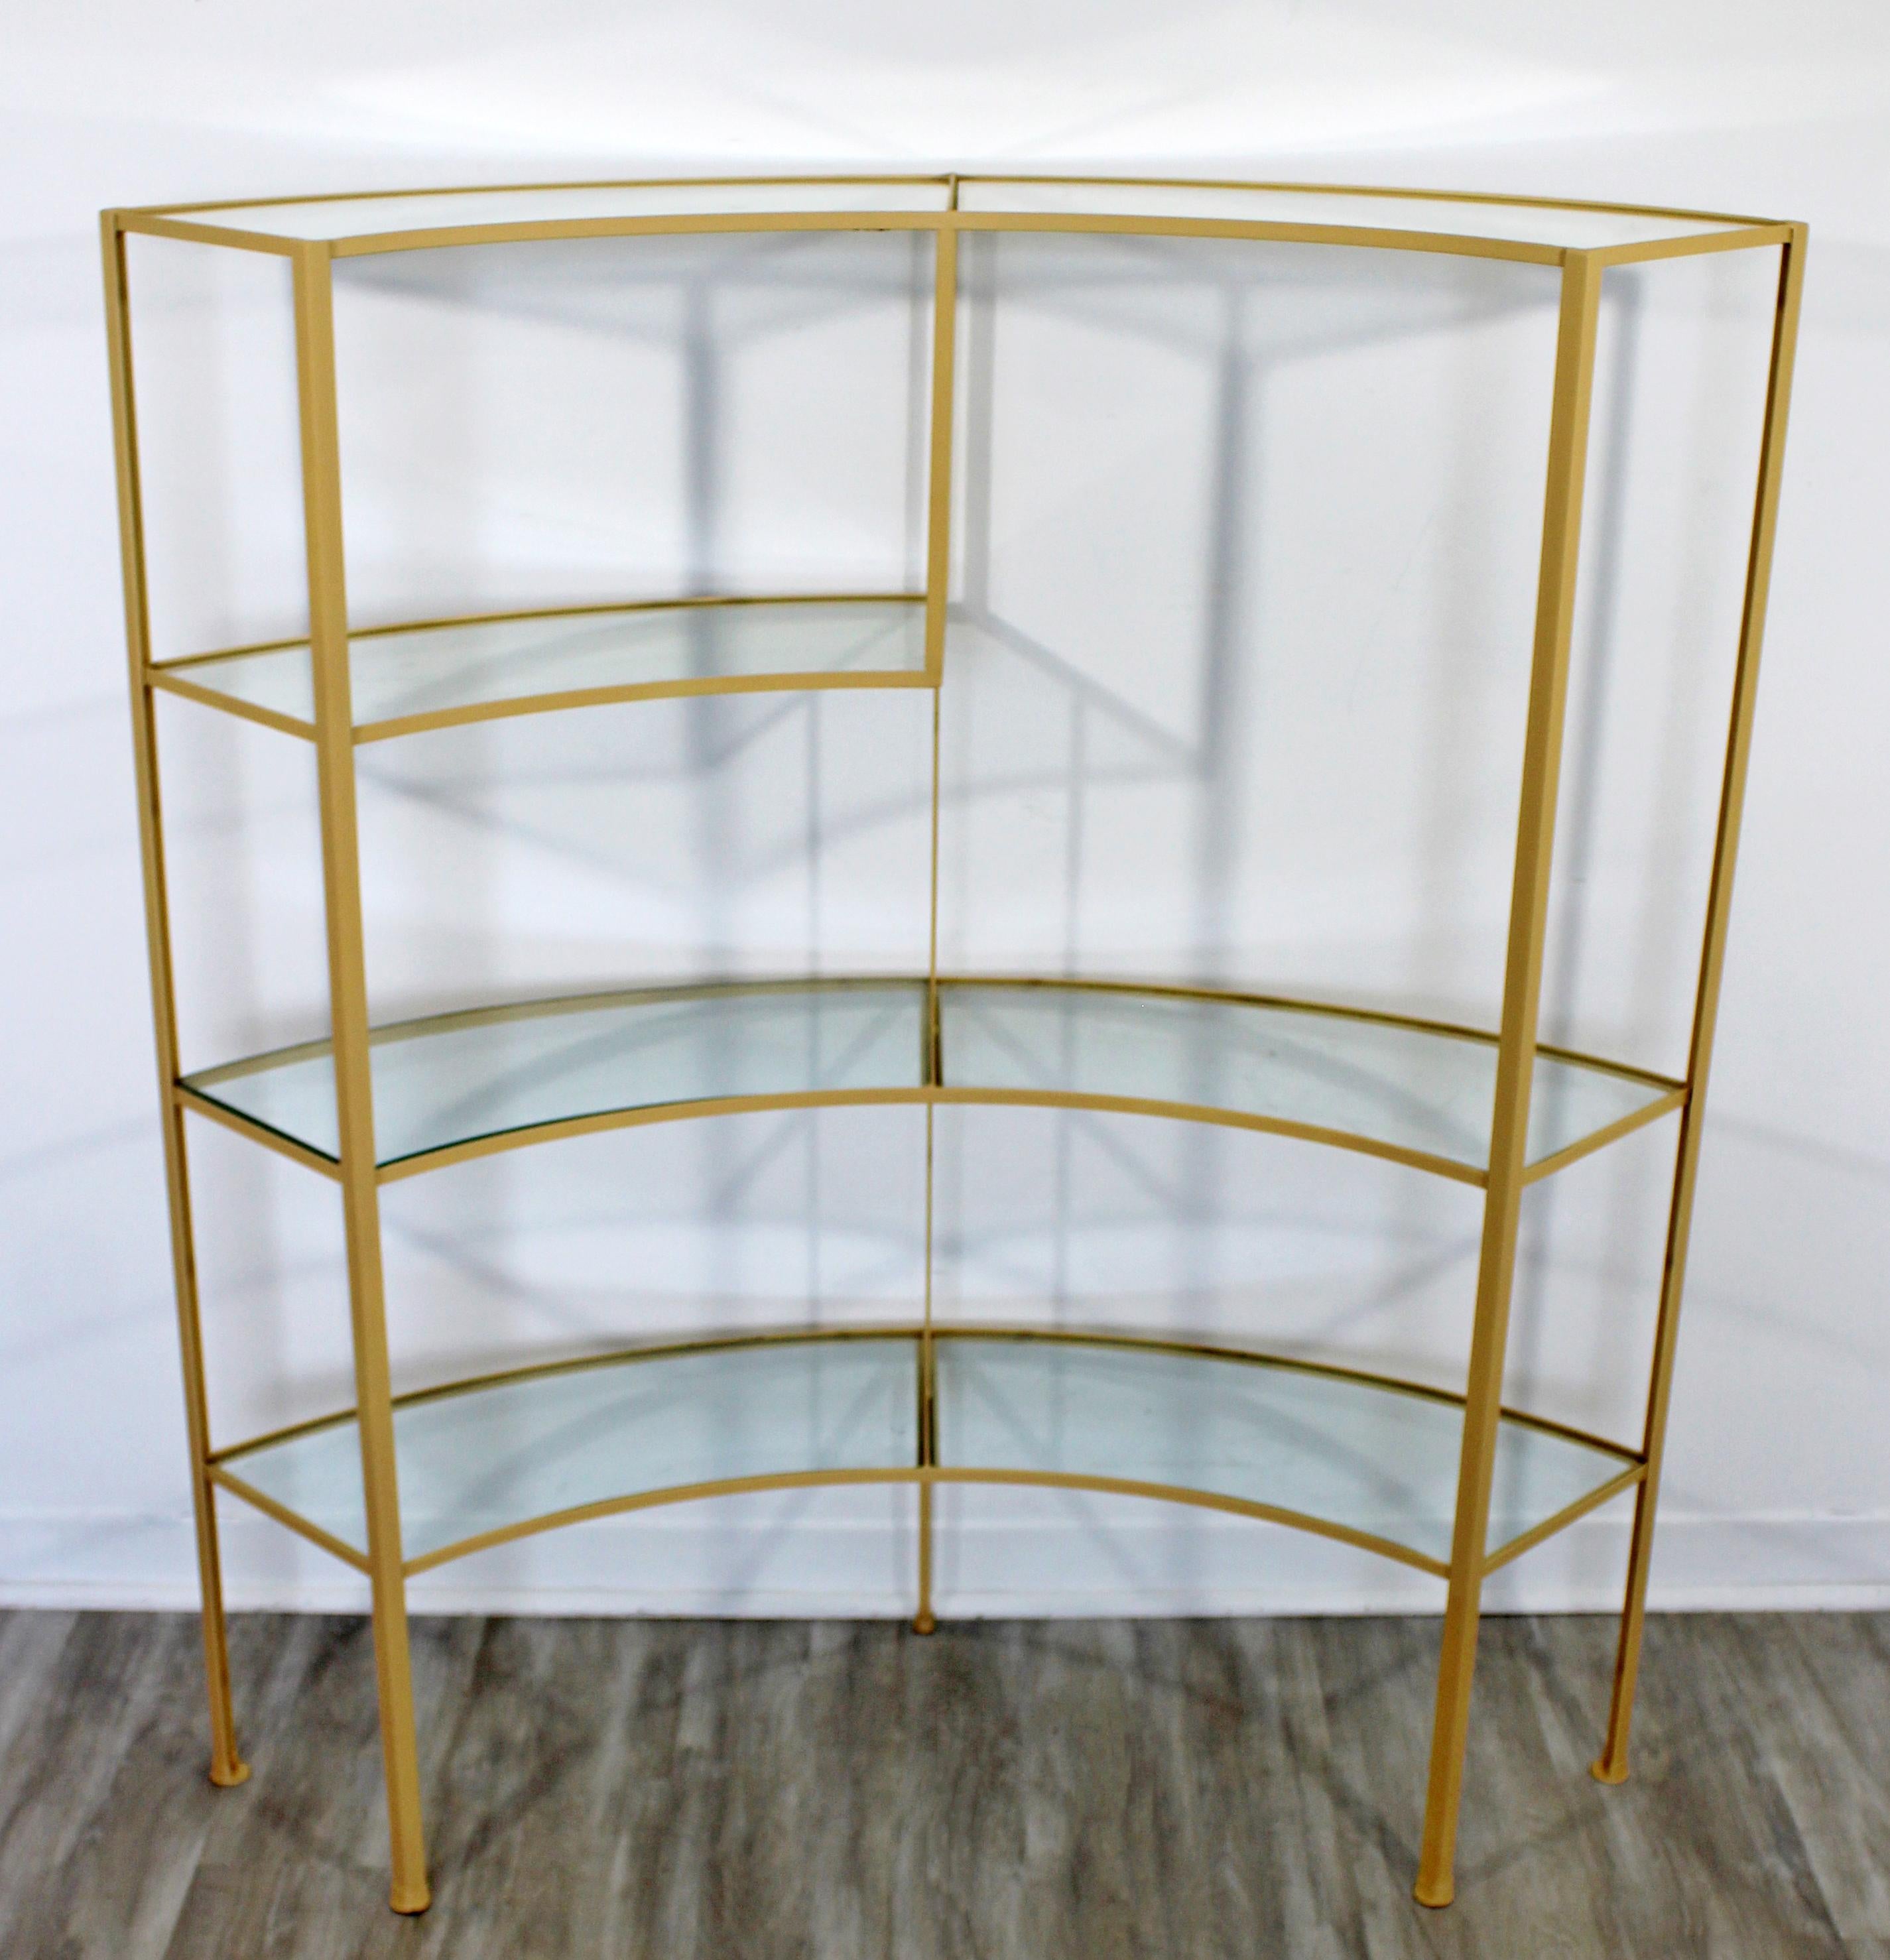 For your consideration is a sculptural, wrought iron étagère with seven glass shelves, by Frederick Weinberg, circa 1950s. In very good vintage condition. The dimensions are 47